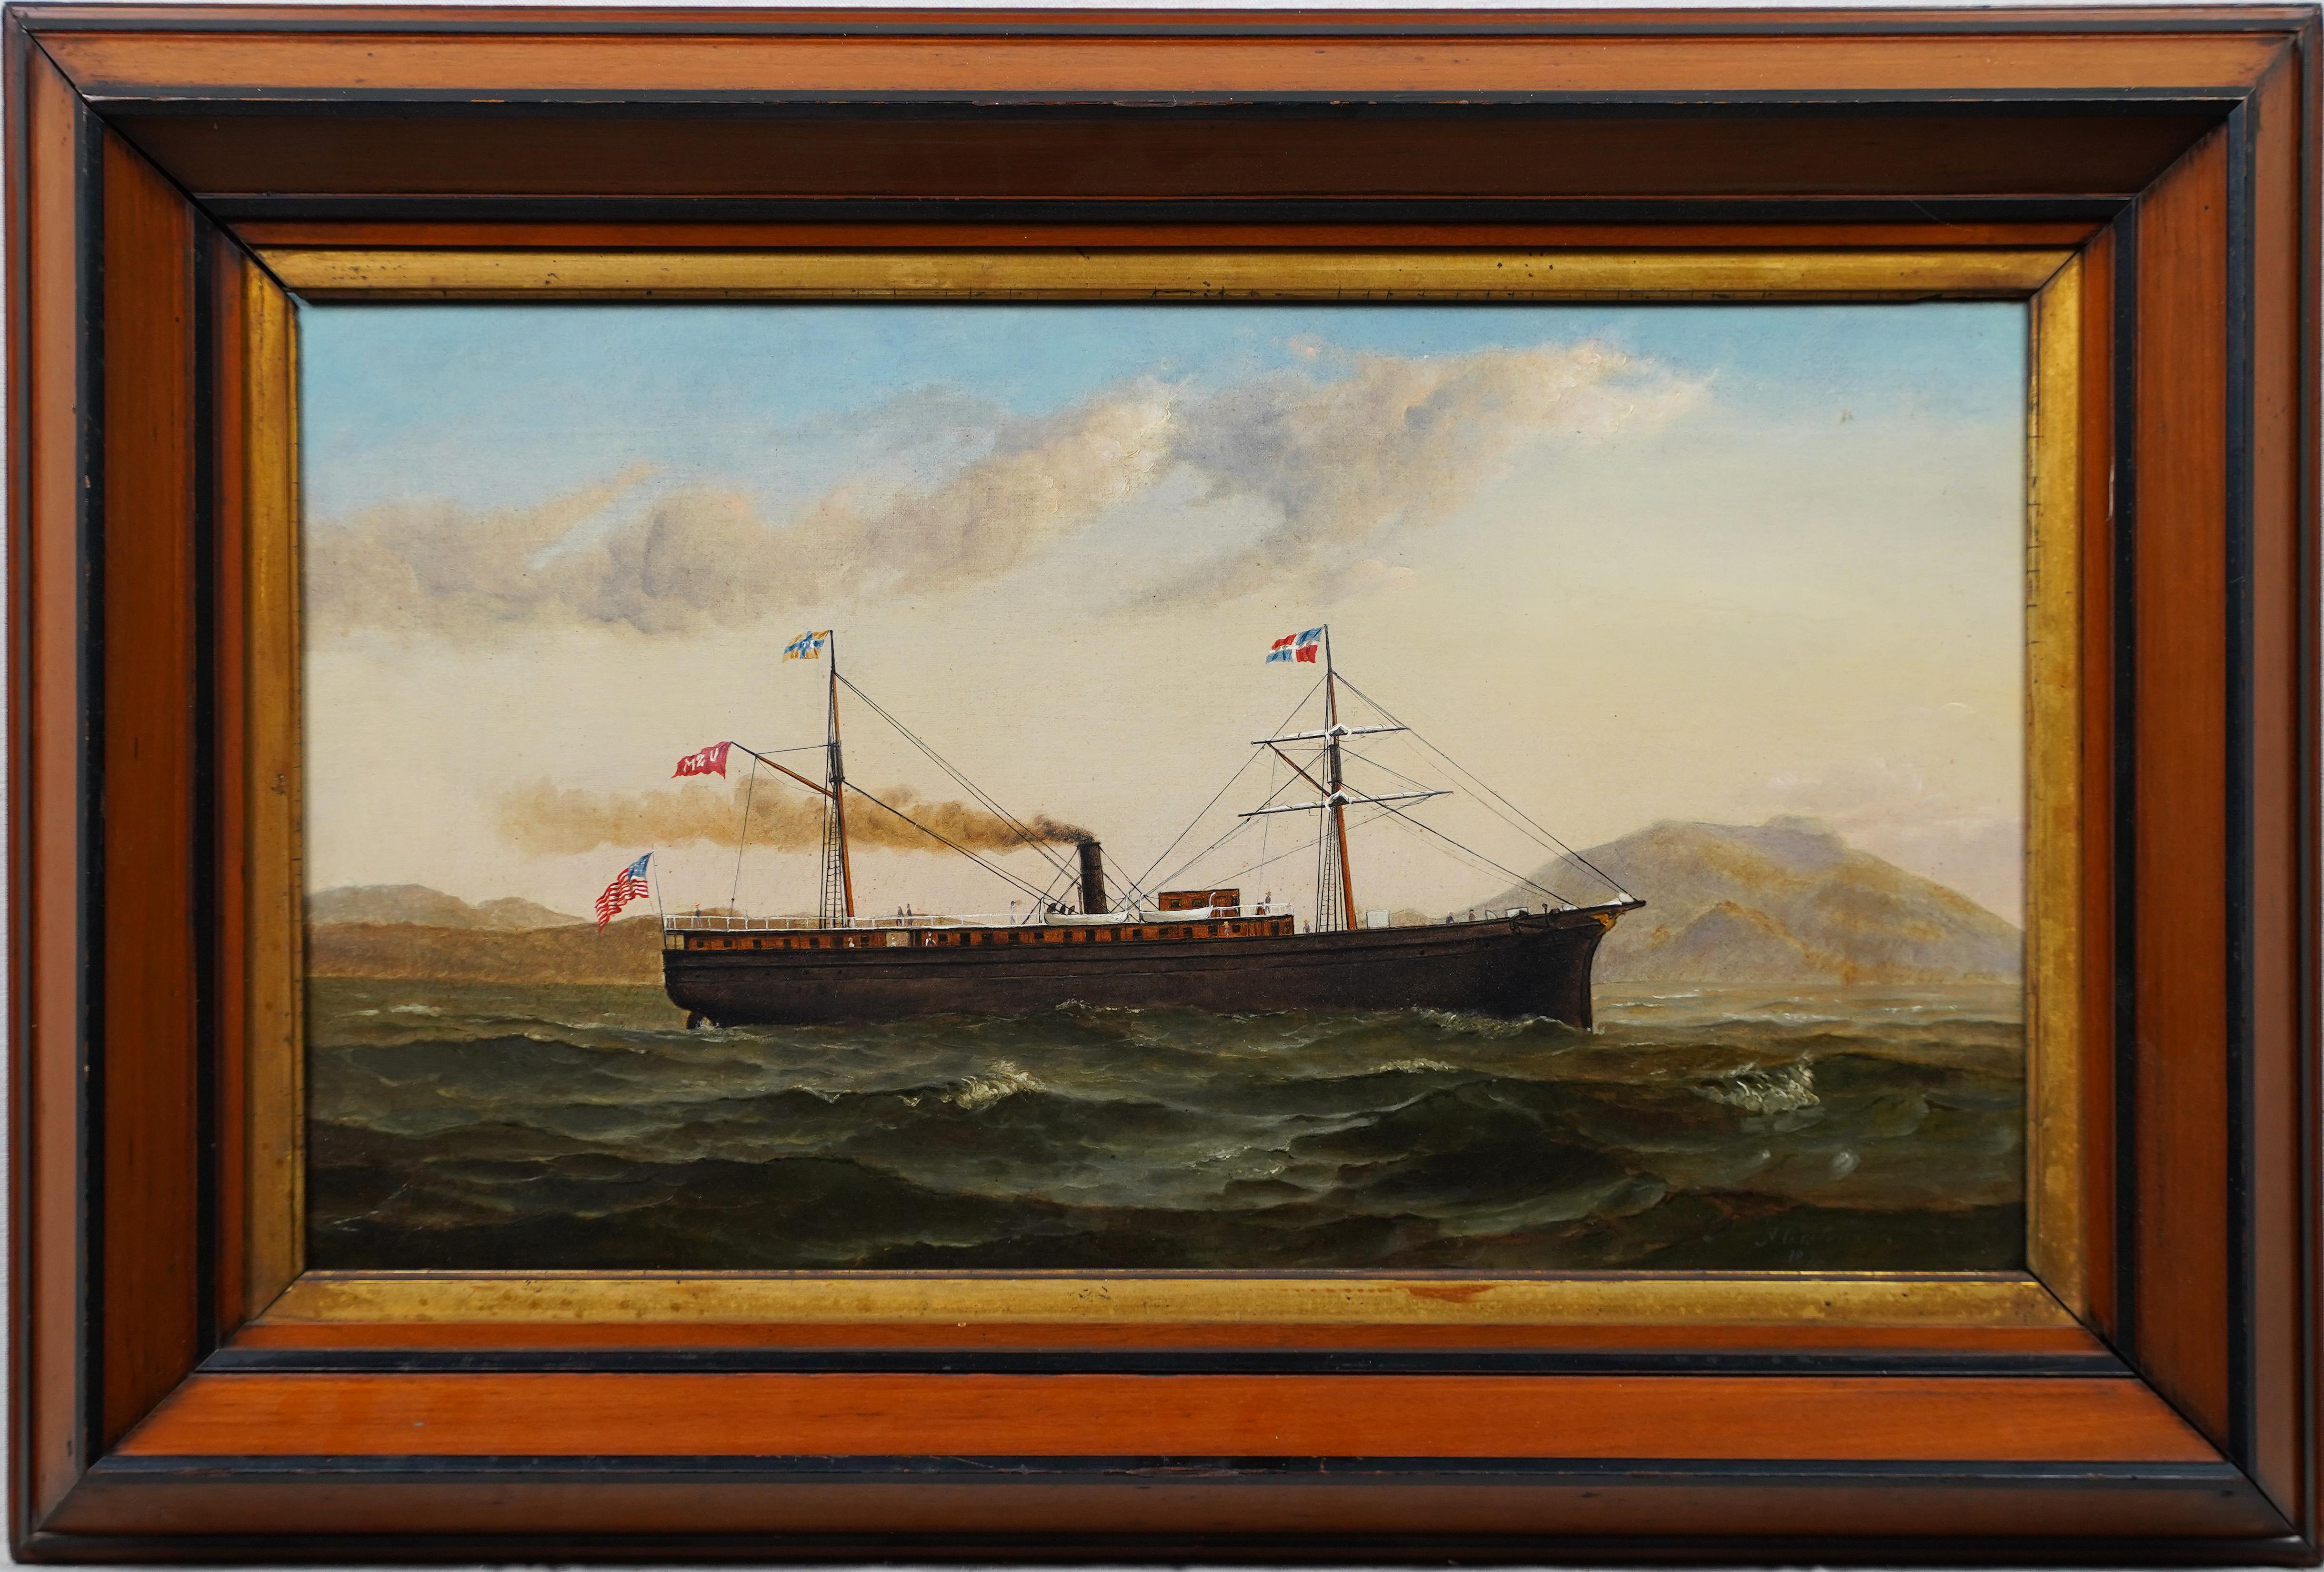 Unknown Landscape Painting - Antique American School Signed 19th Century Nautical Seascape Framed Painting